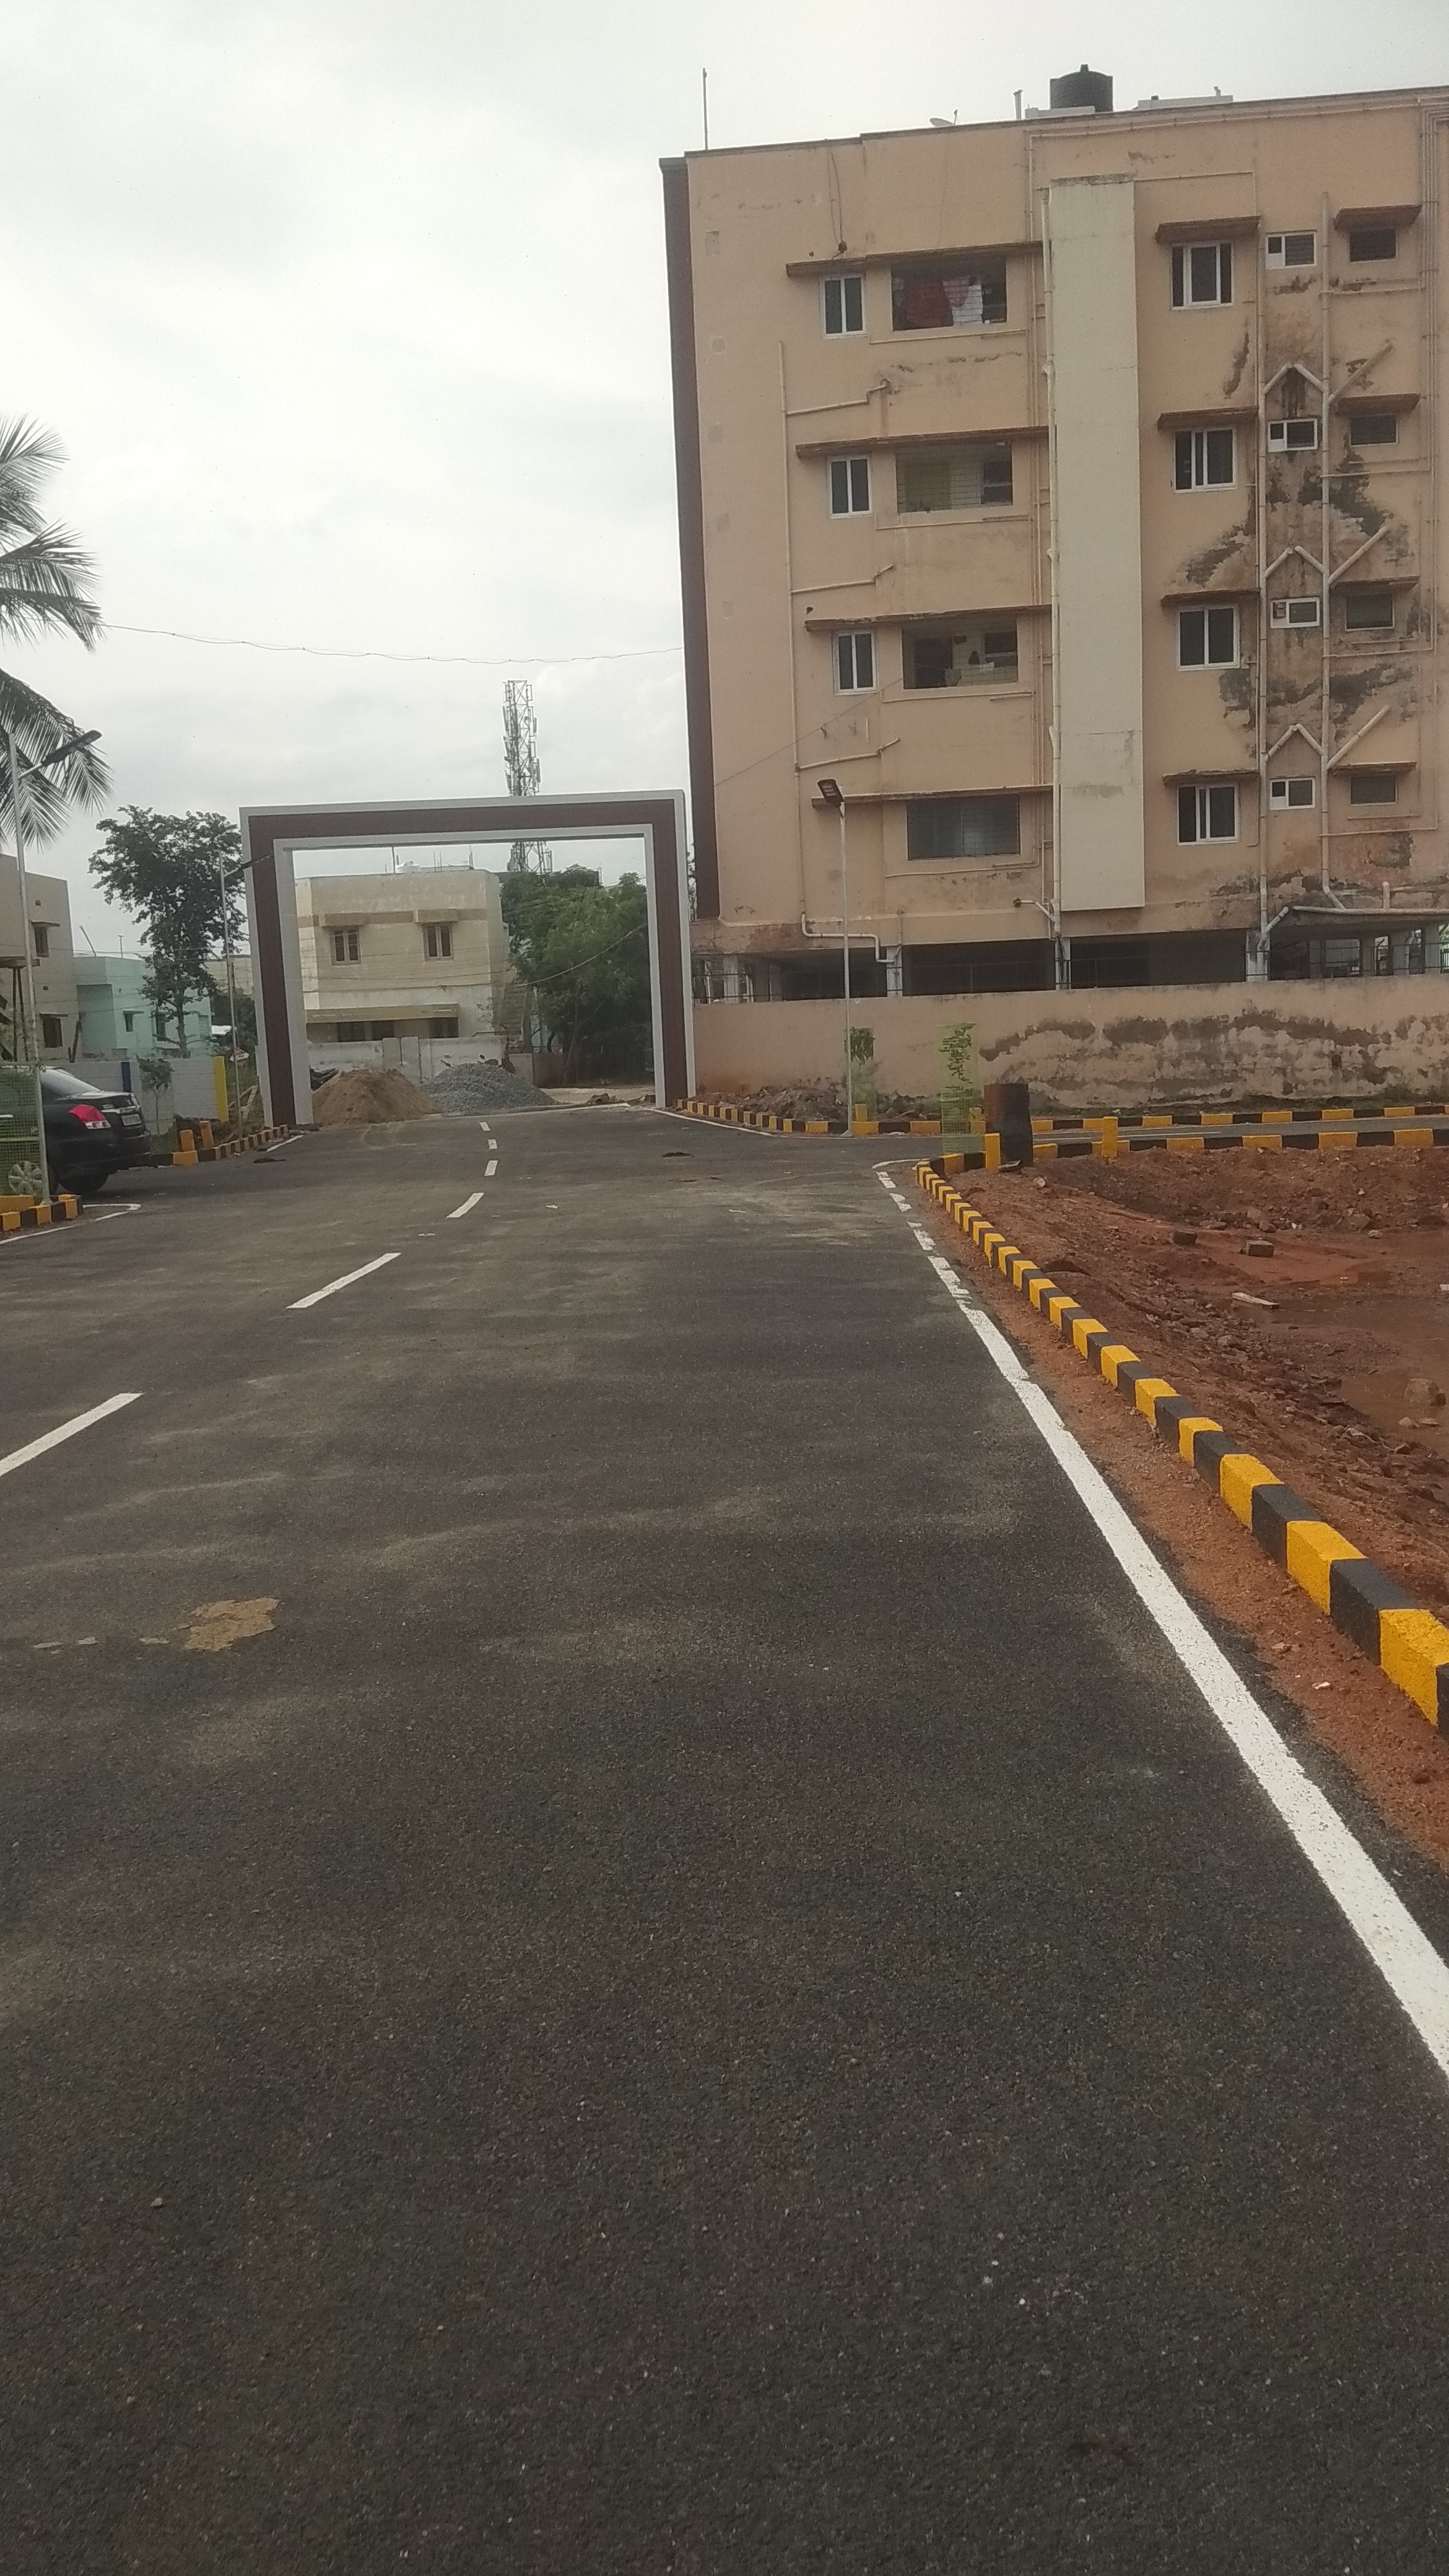 ASHOK LAKE AVENUE DTCP APPROVED LAYOUT NEAR BY MATTUTHAVANI BUS STAND,Madurai,Real Estate,Free Classifieds,Post Free Ads,77traders.com